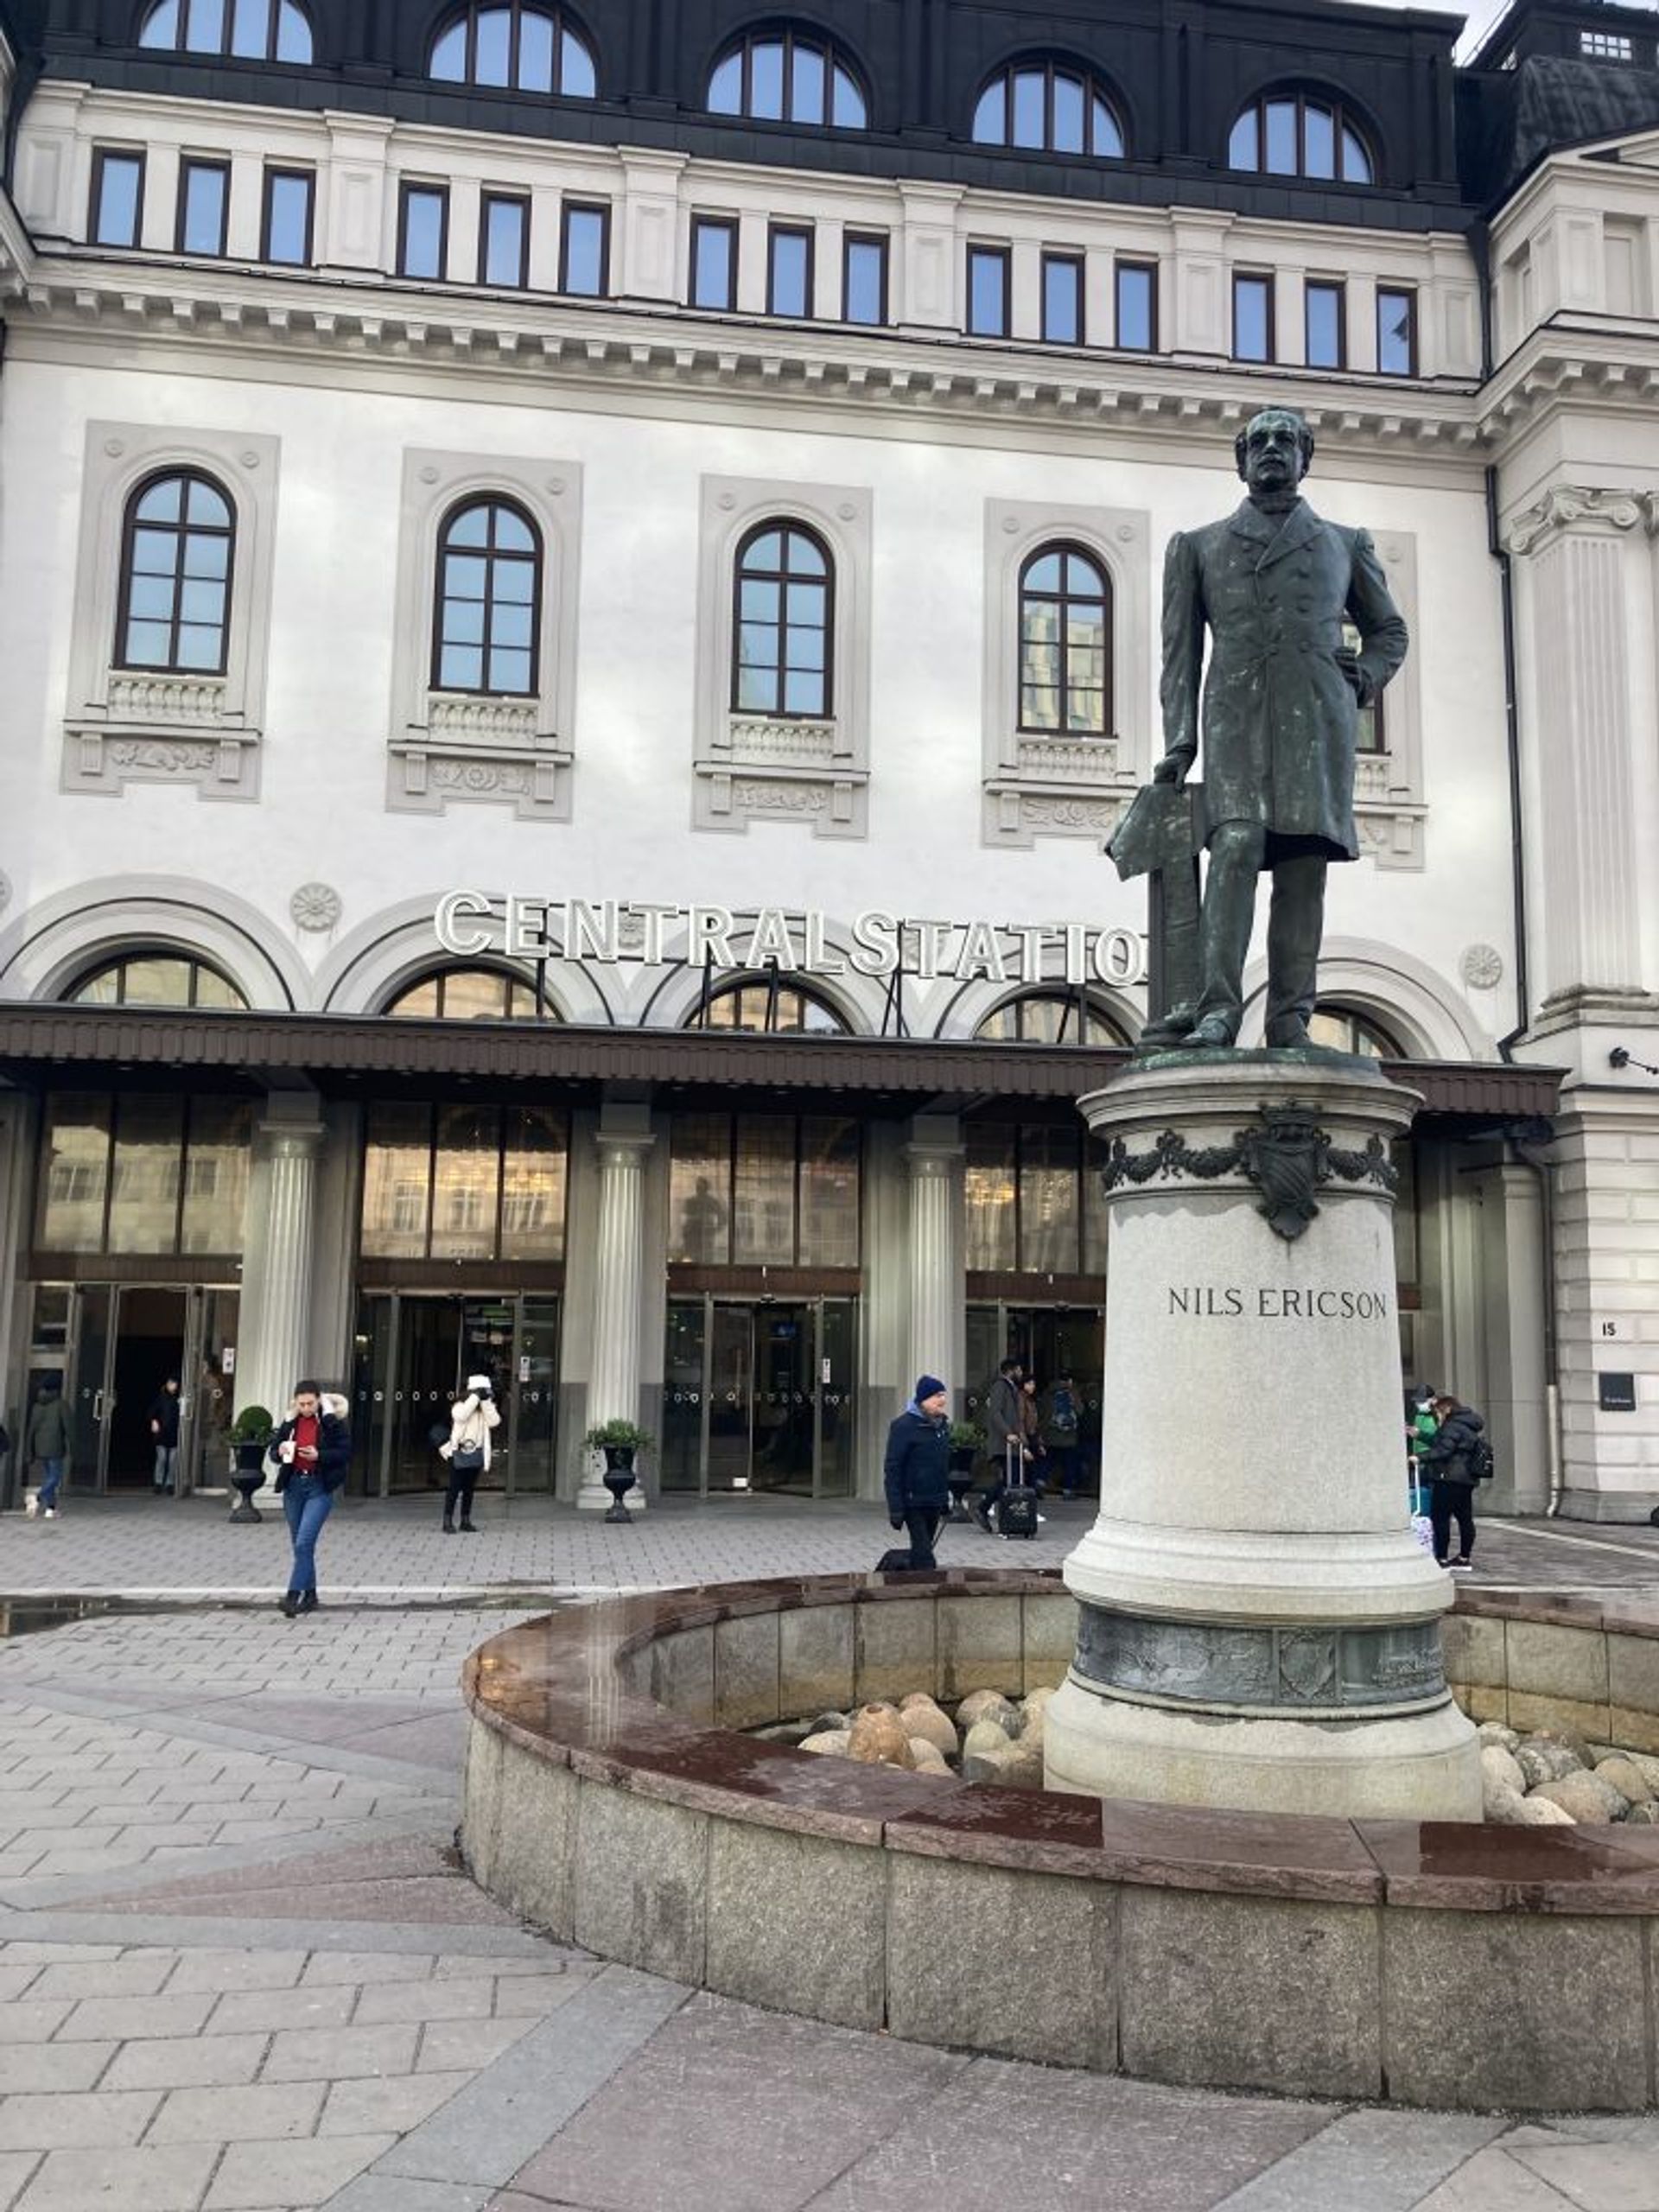 Statue in front of the central station in Stockholm.